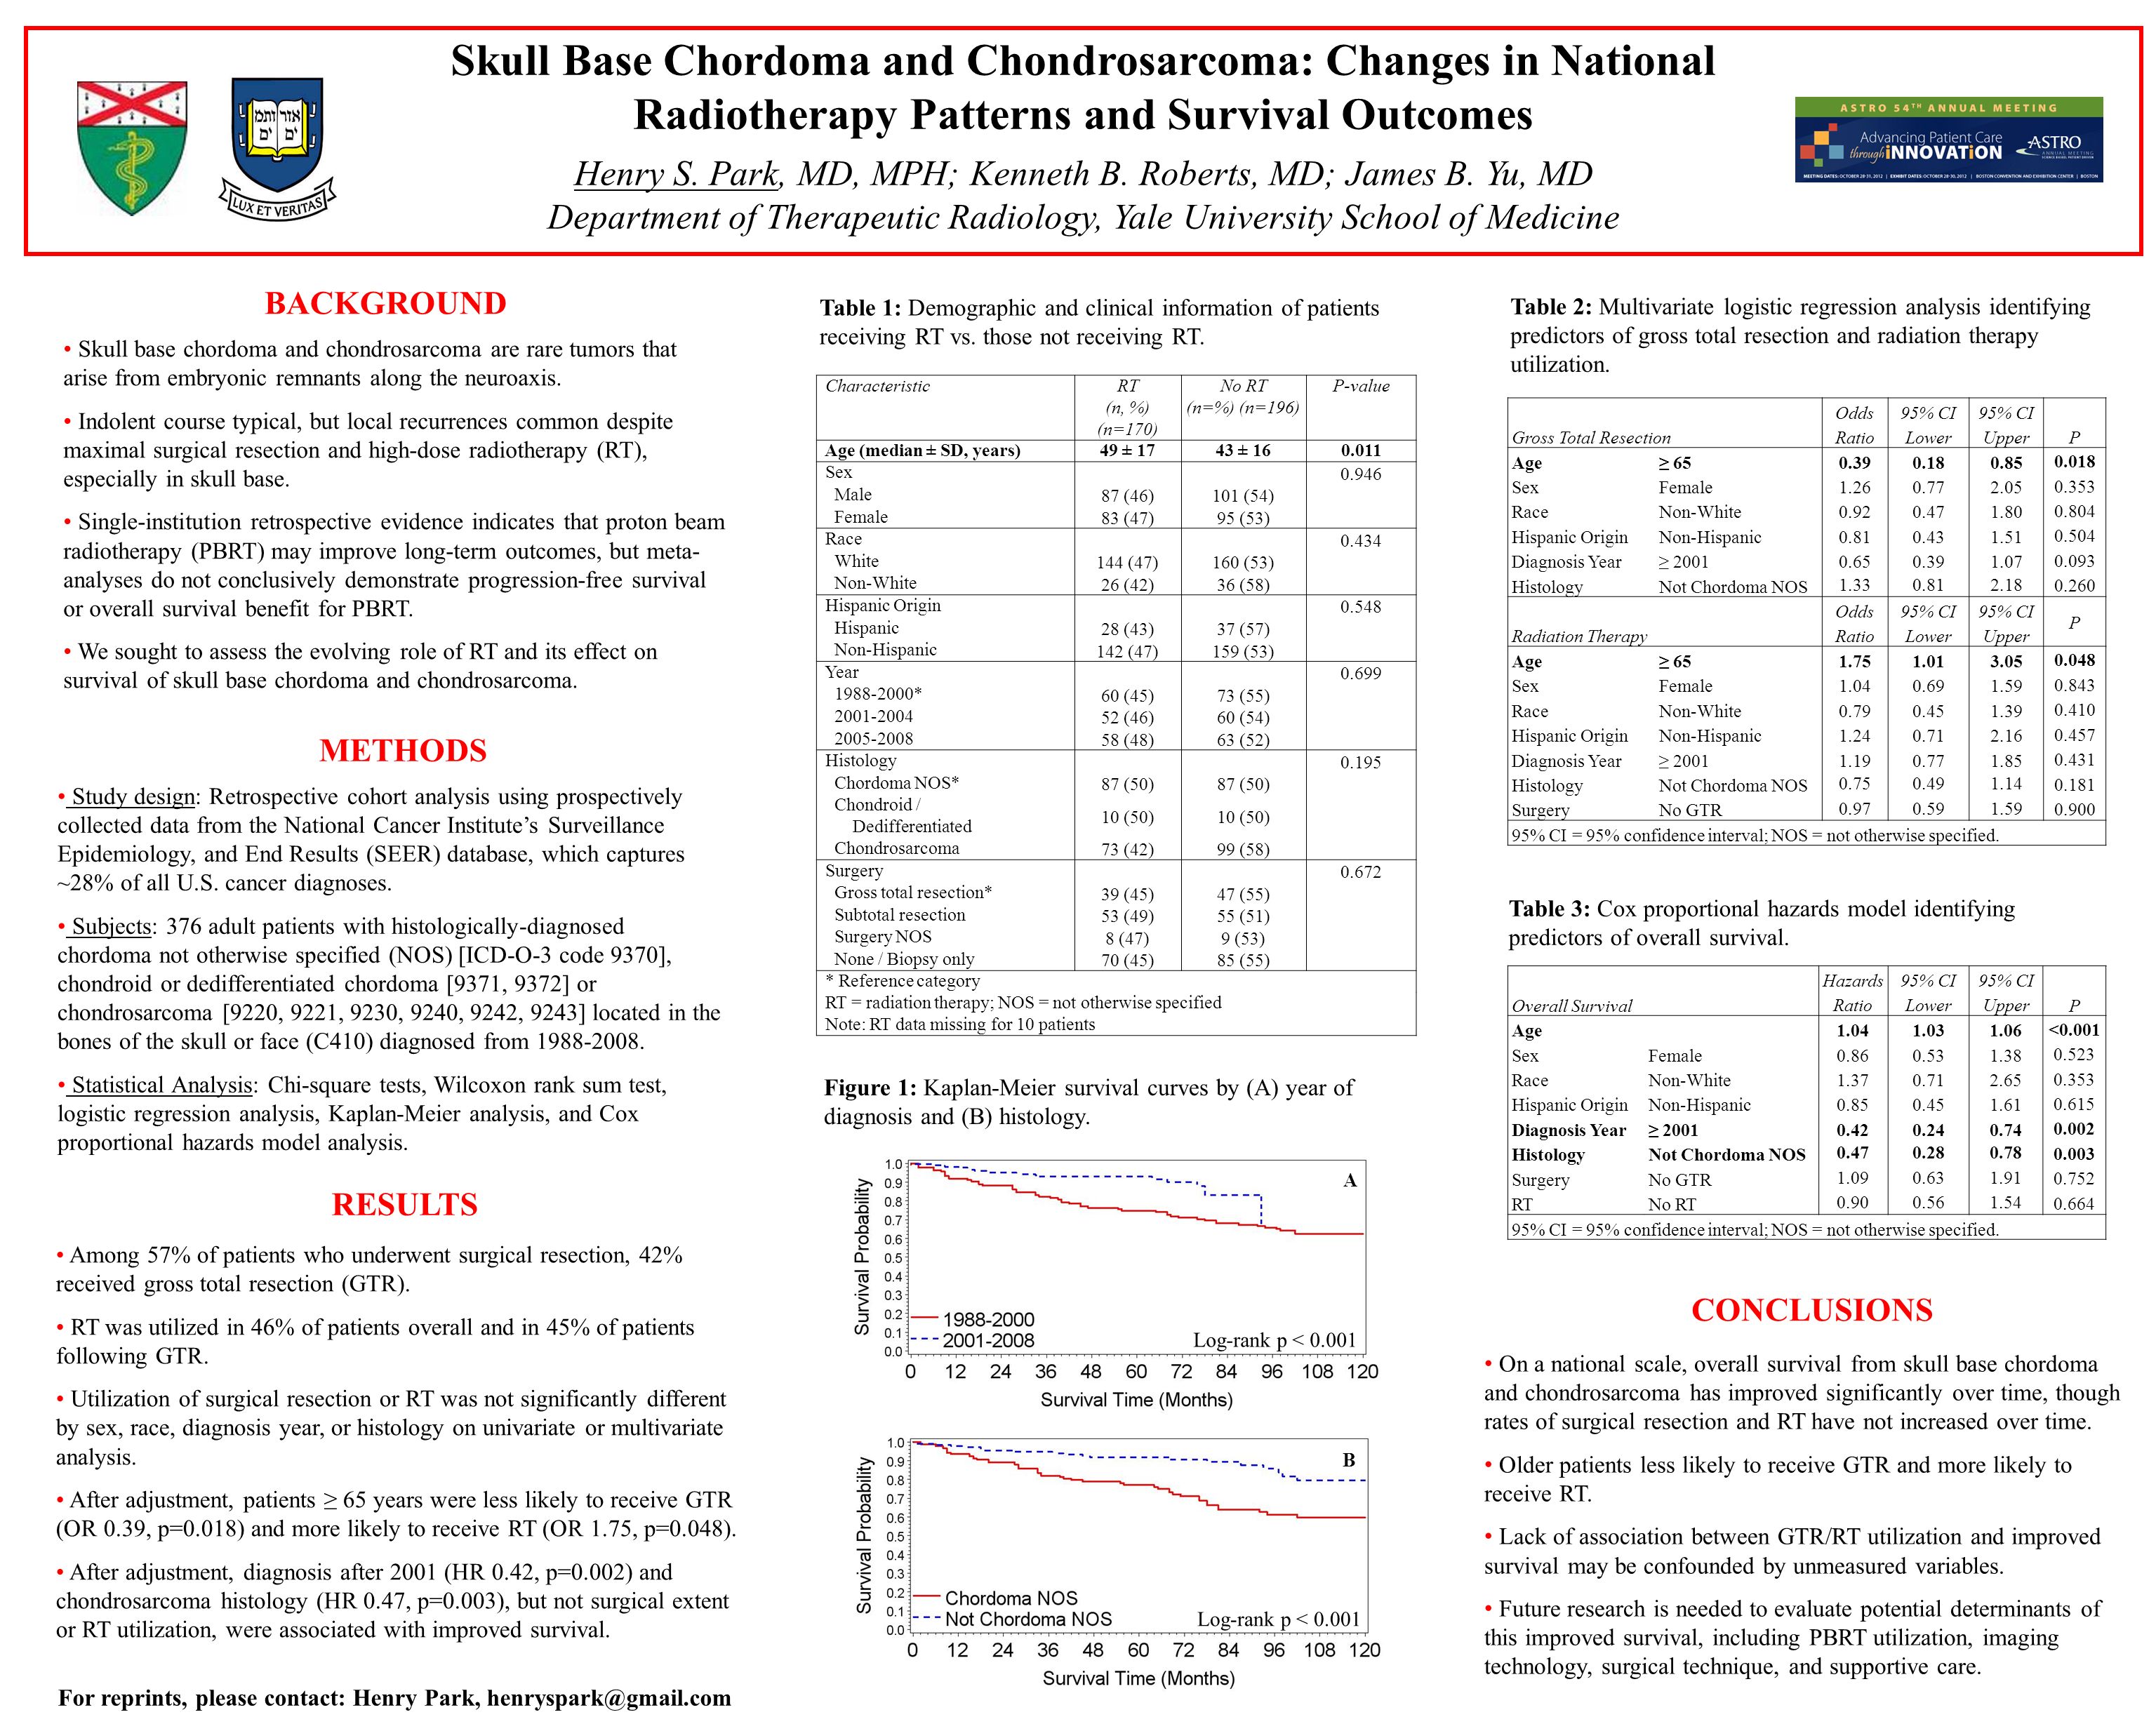 Skull Base Chordoma and Chondrosarcoma: Changes in National Radiotherapy Patterns and Survival Outcomes Henry S.